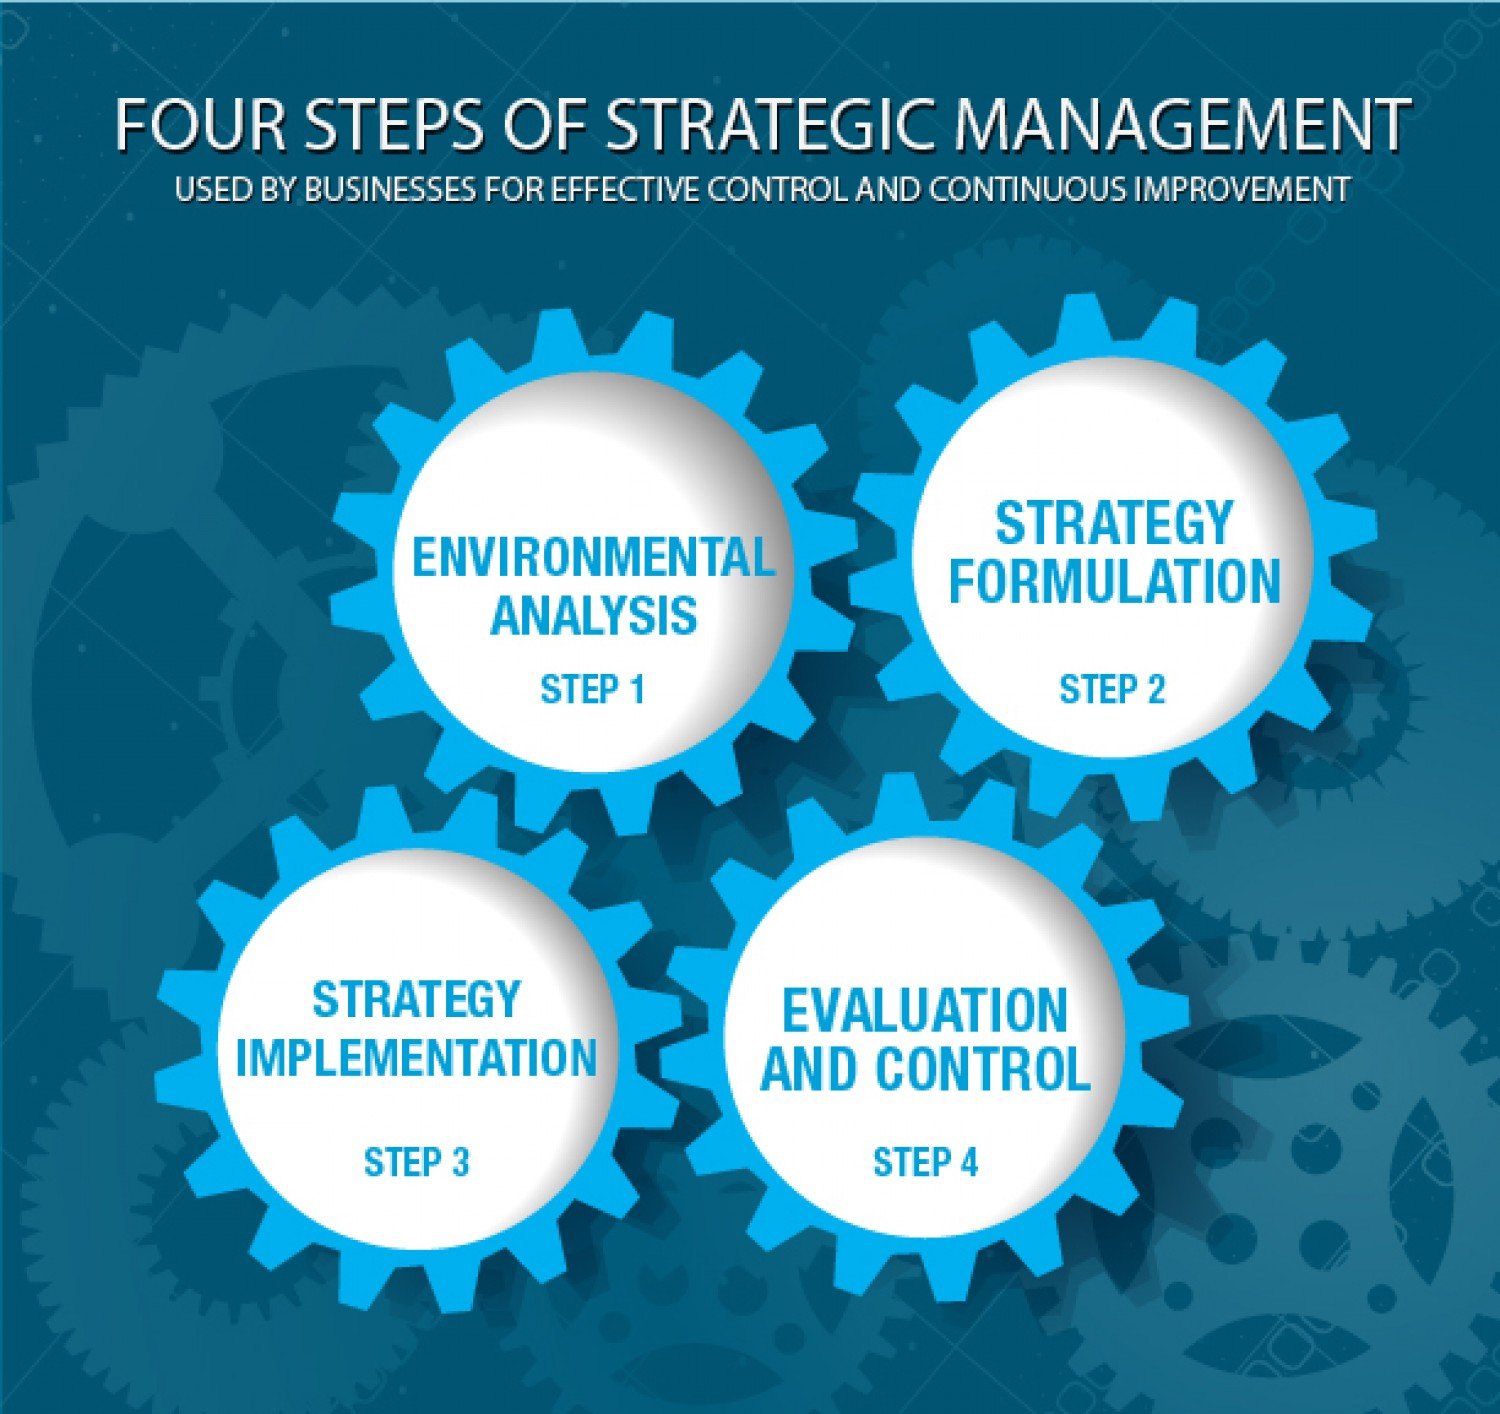 Strategy implementation. Step Strategic Management. What is Strategy. Strategic planning implementation. Step 1 of 4